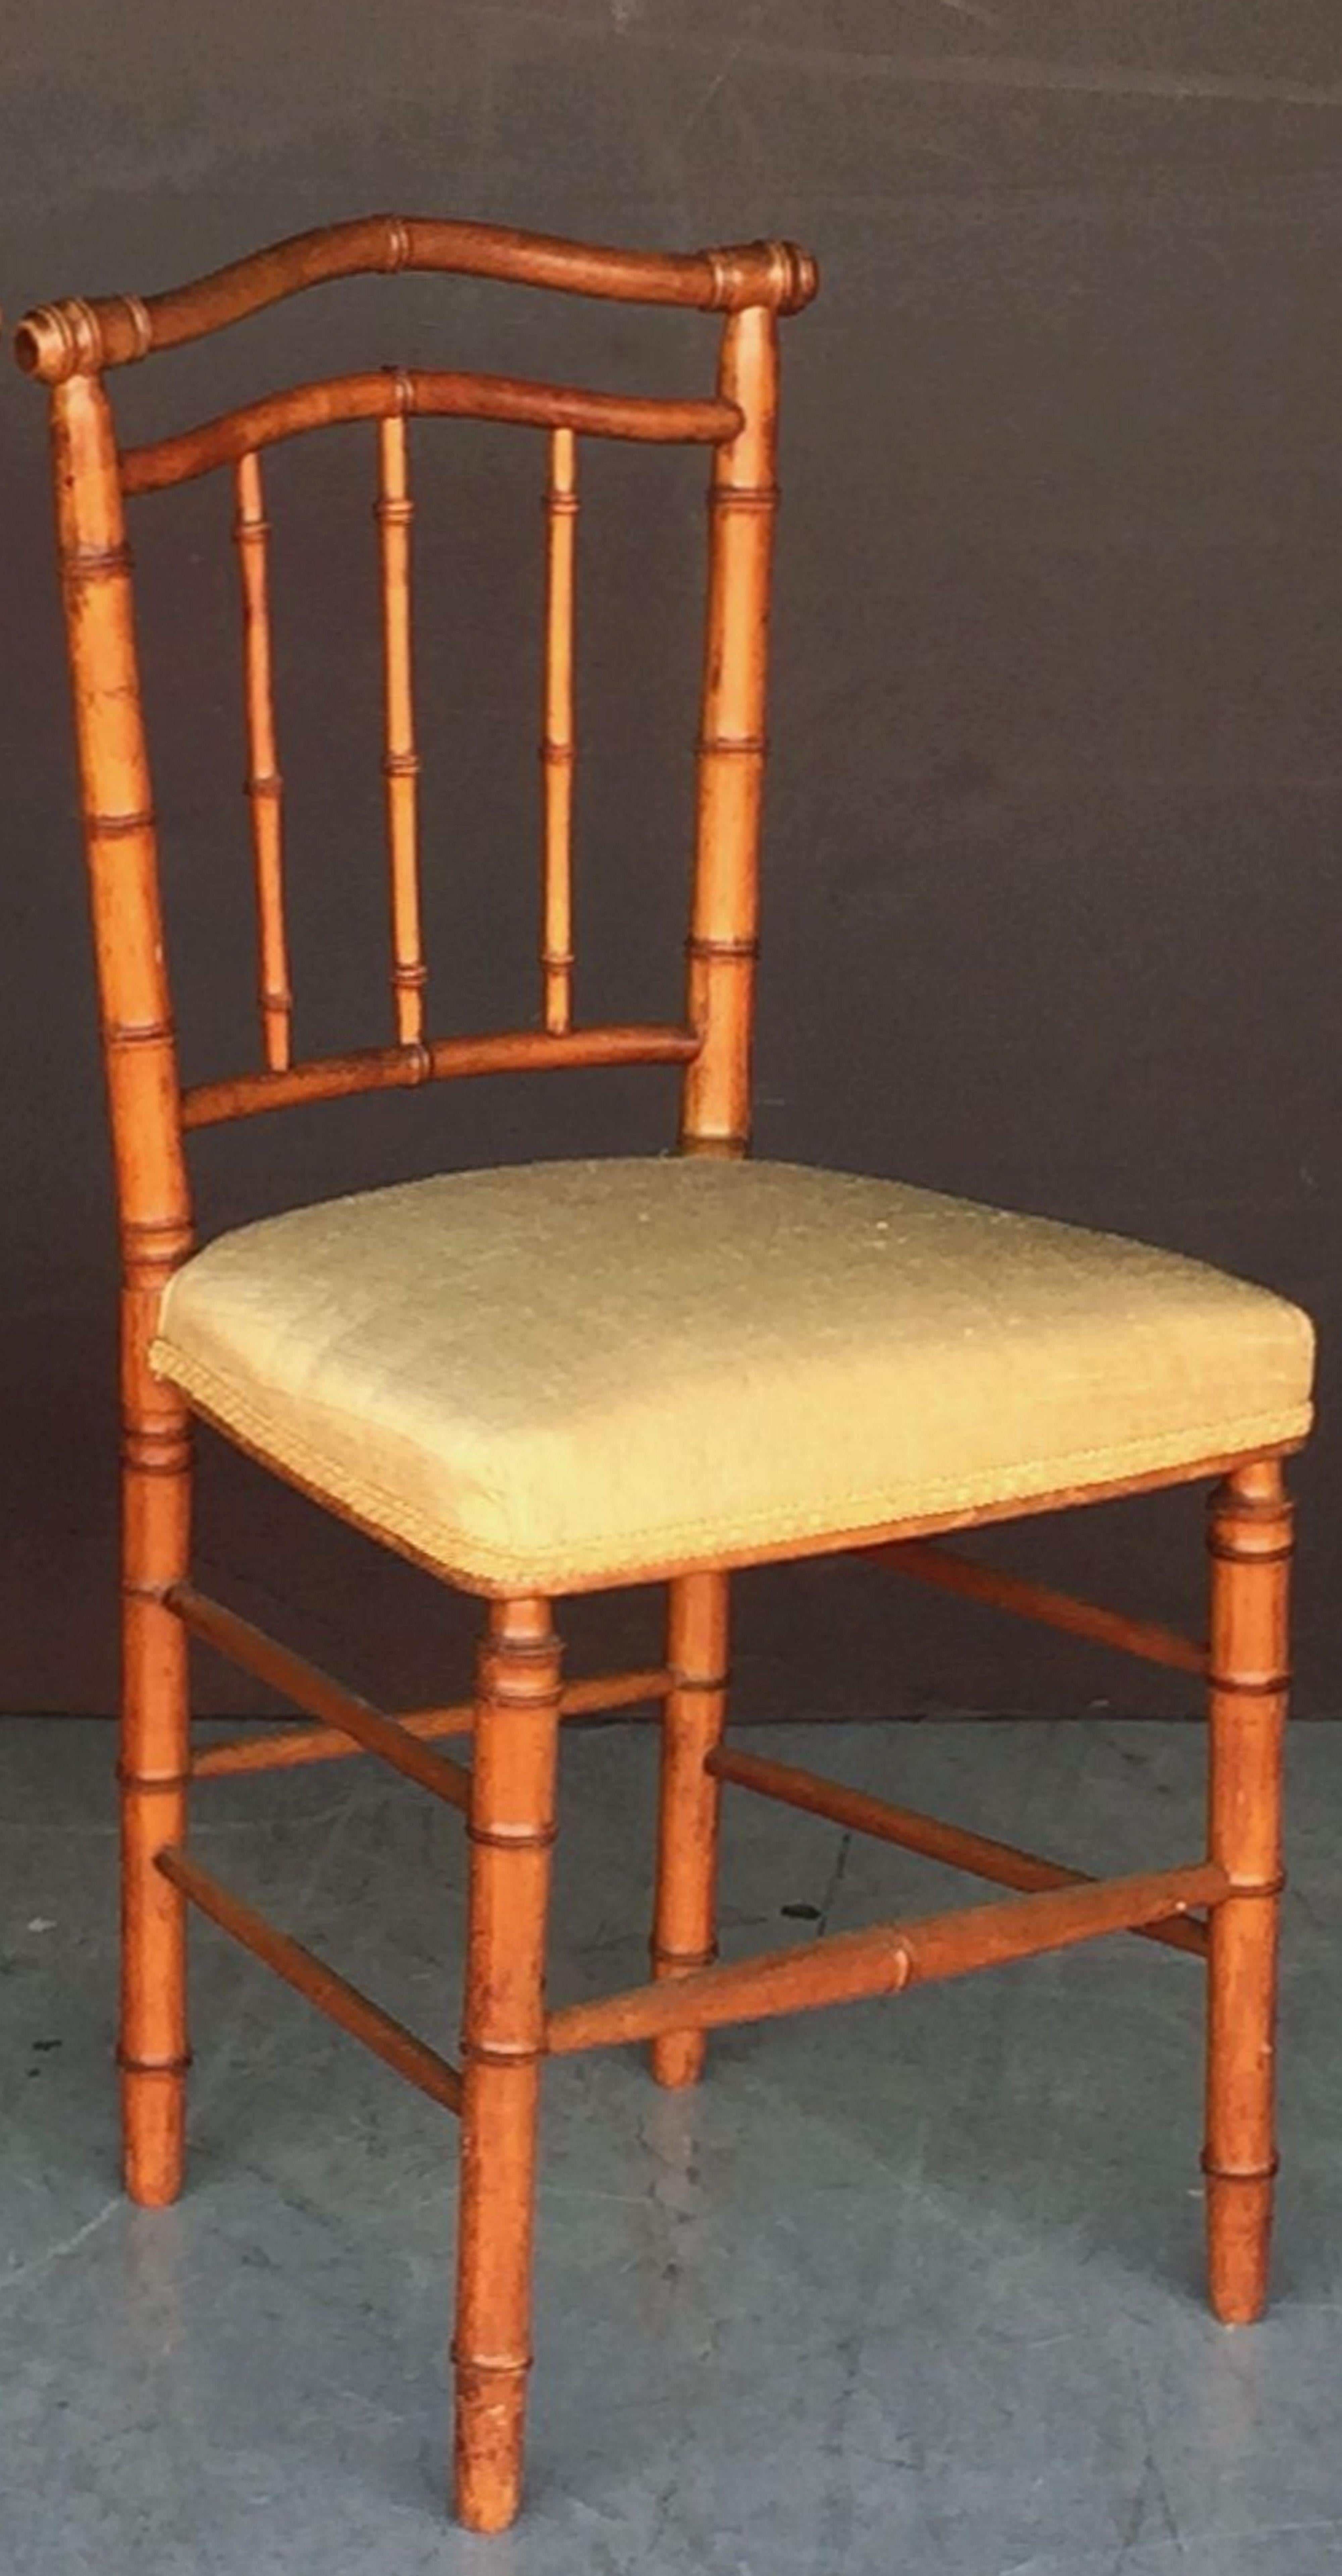 A handsome English faux bamboo chair, featuring a turned wood back and leg supports, with upholstered seat of fine Thai silk from the Jim Thompson collection.

